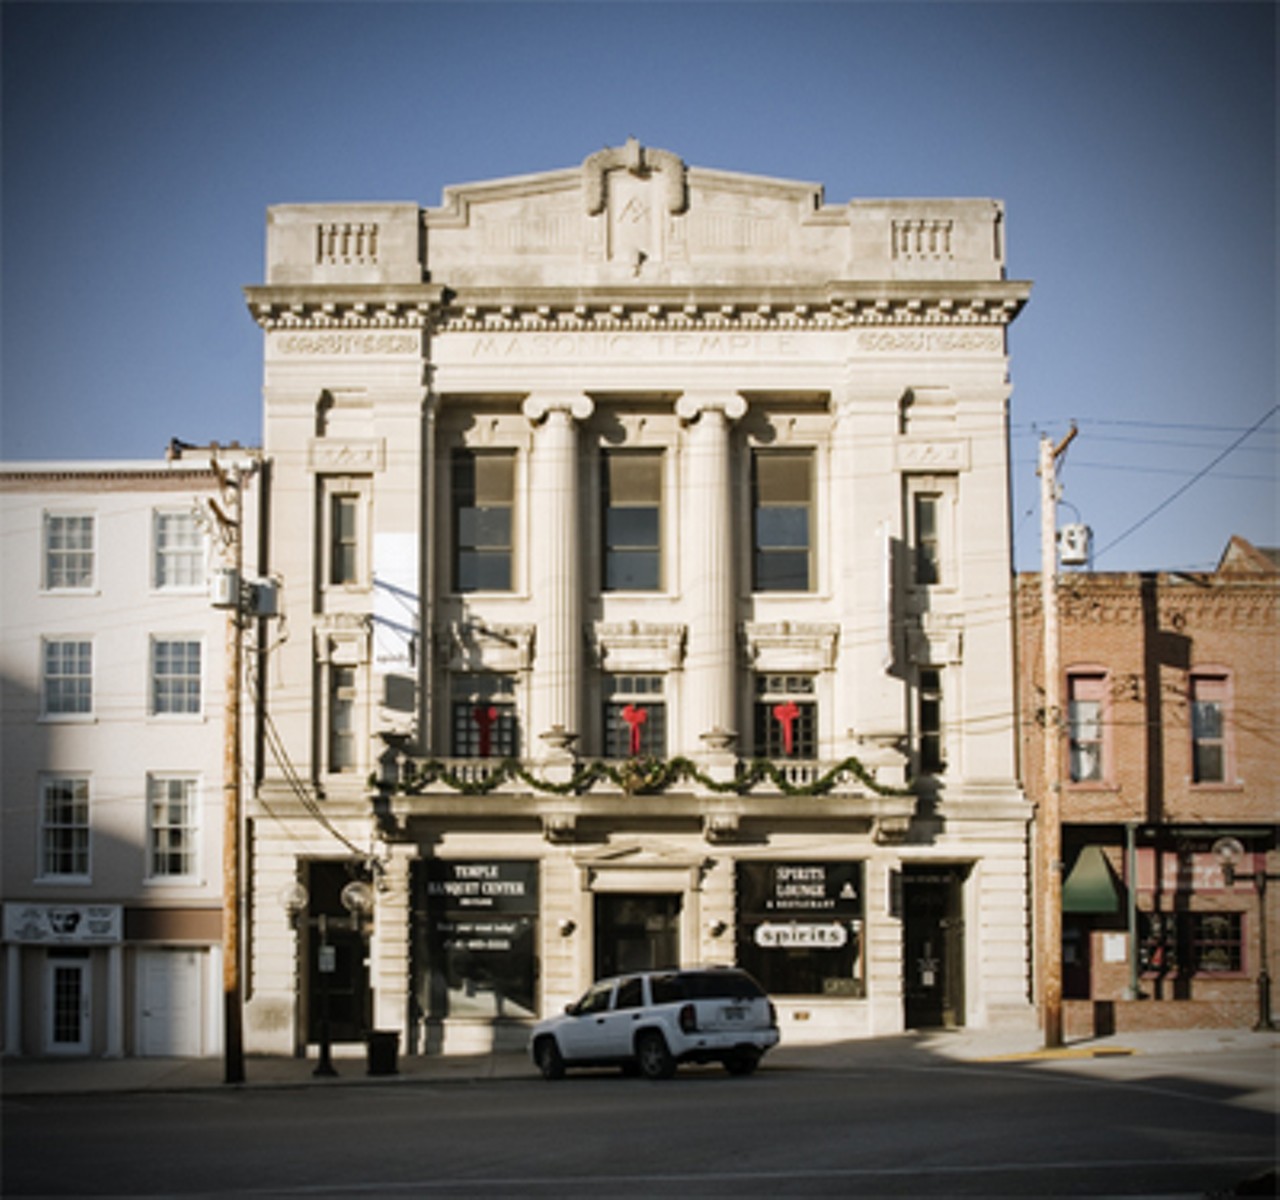 Alton's former Masonic temple, a building that now hosts a saloon of its own on the ground floor.